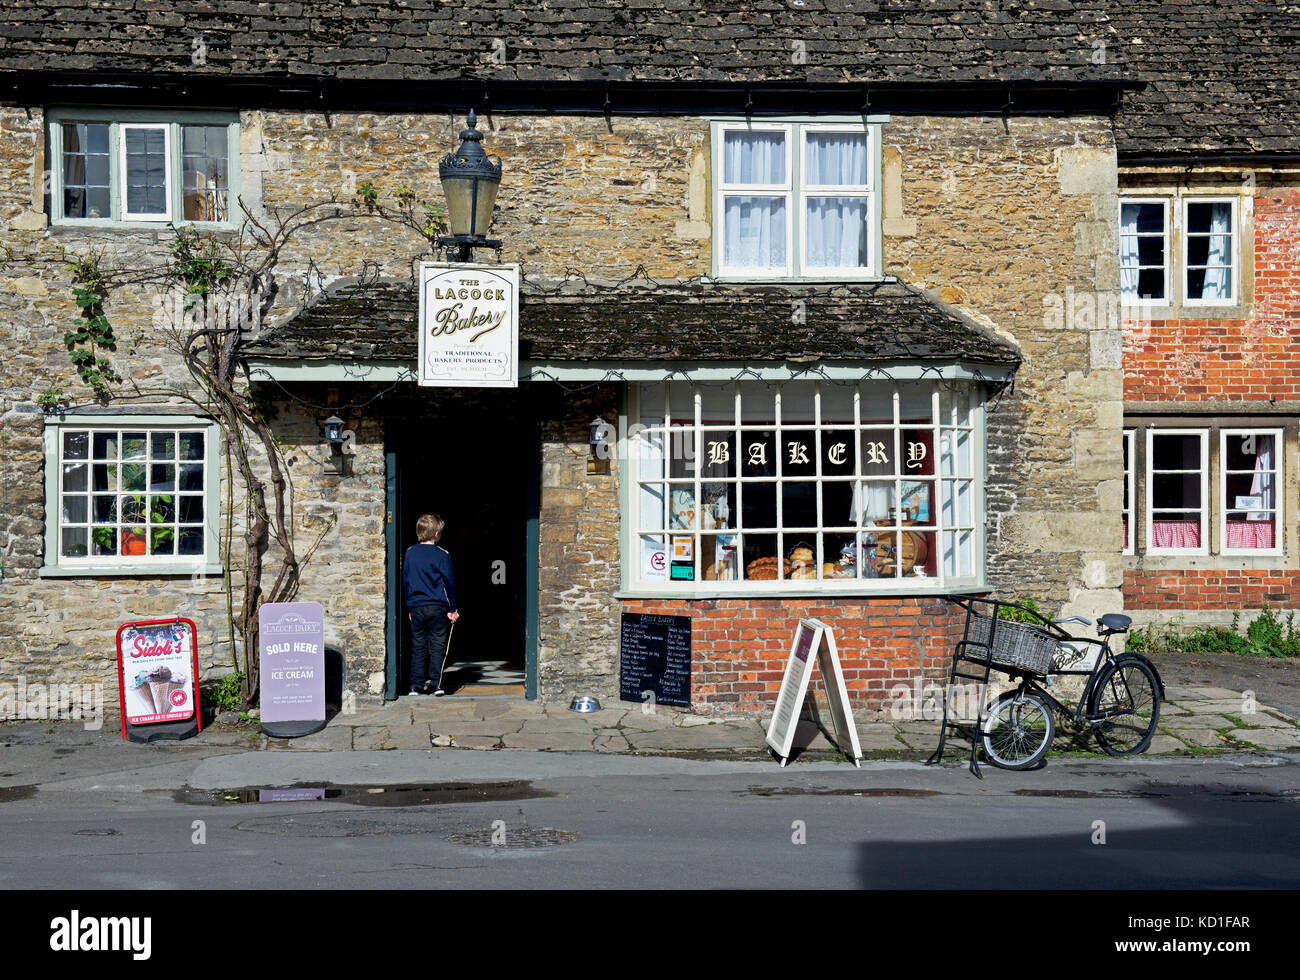 The bakery in the village of Lacock, Wiltshire, England UK Stock Photo